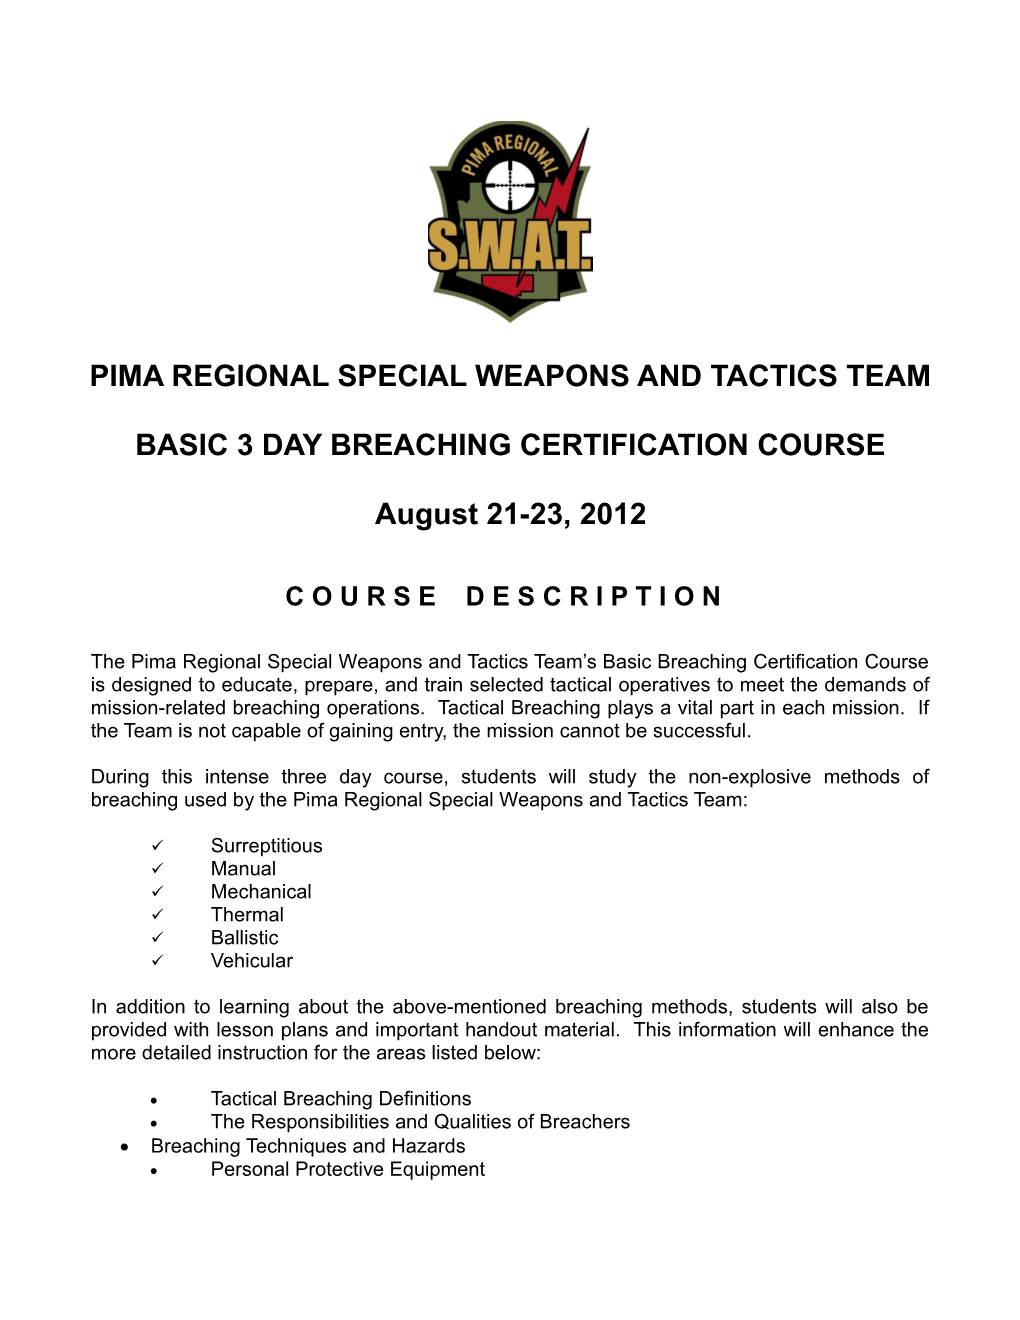 Pima Regional Special Weapons and Tactics Team